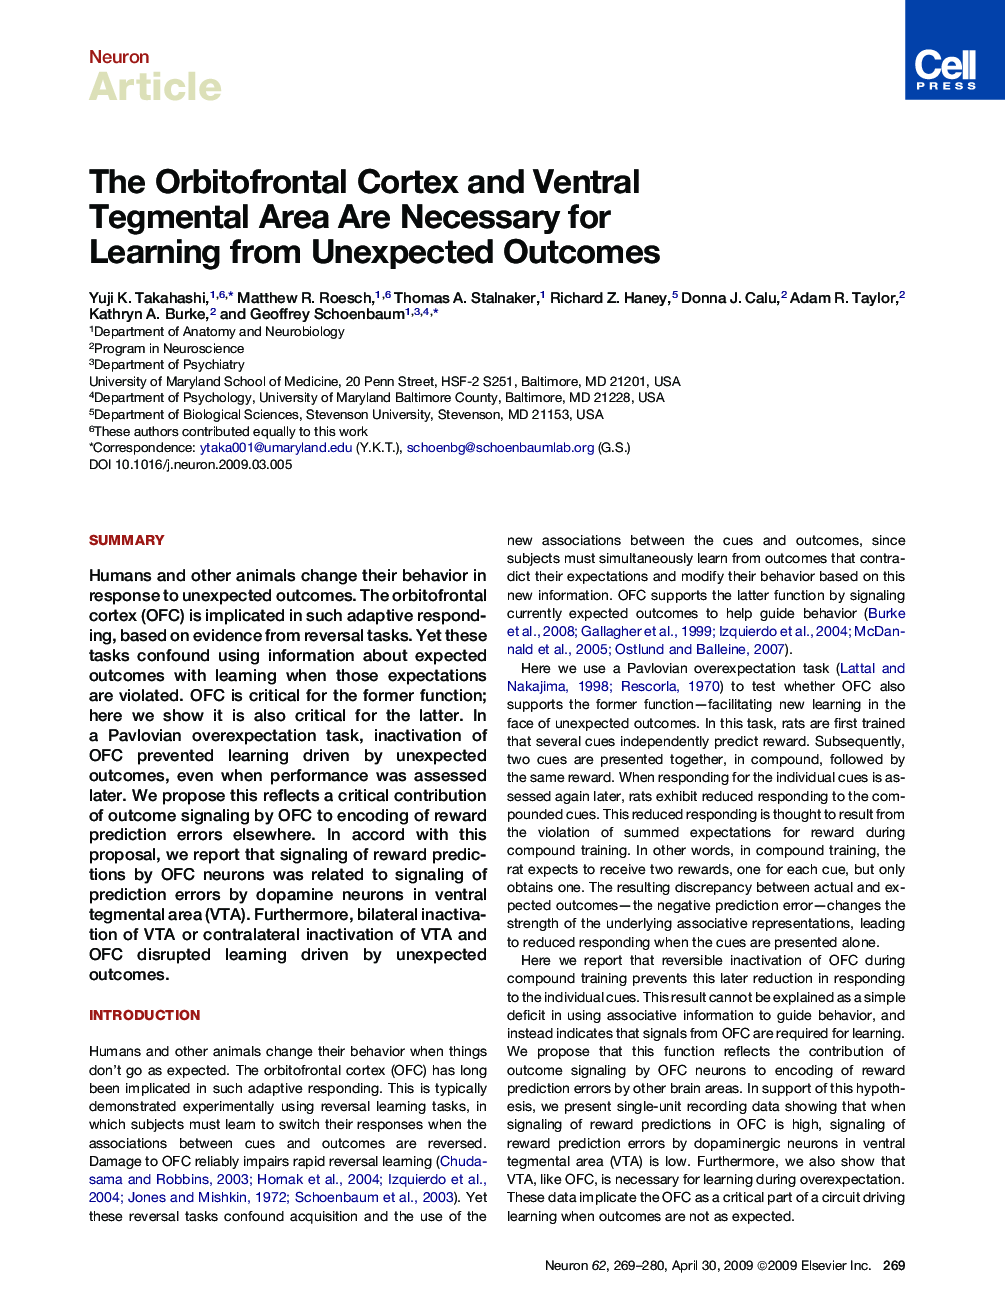 The Orbitofrontal Cortex and Ventral Tegmental Area Are Necessary for Learning from Unexpected Outcomes